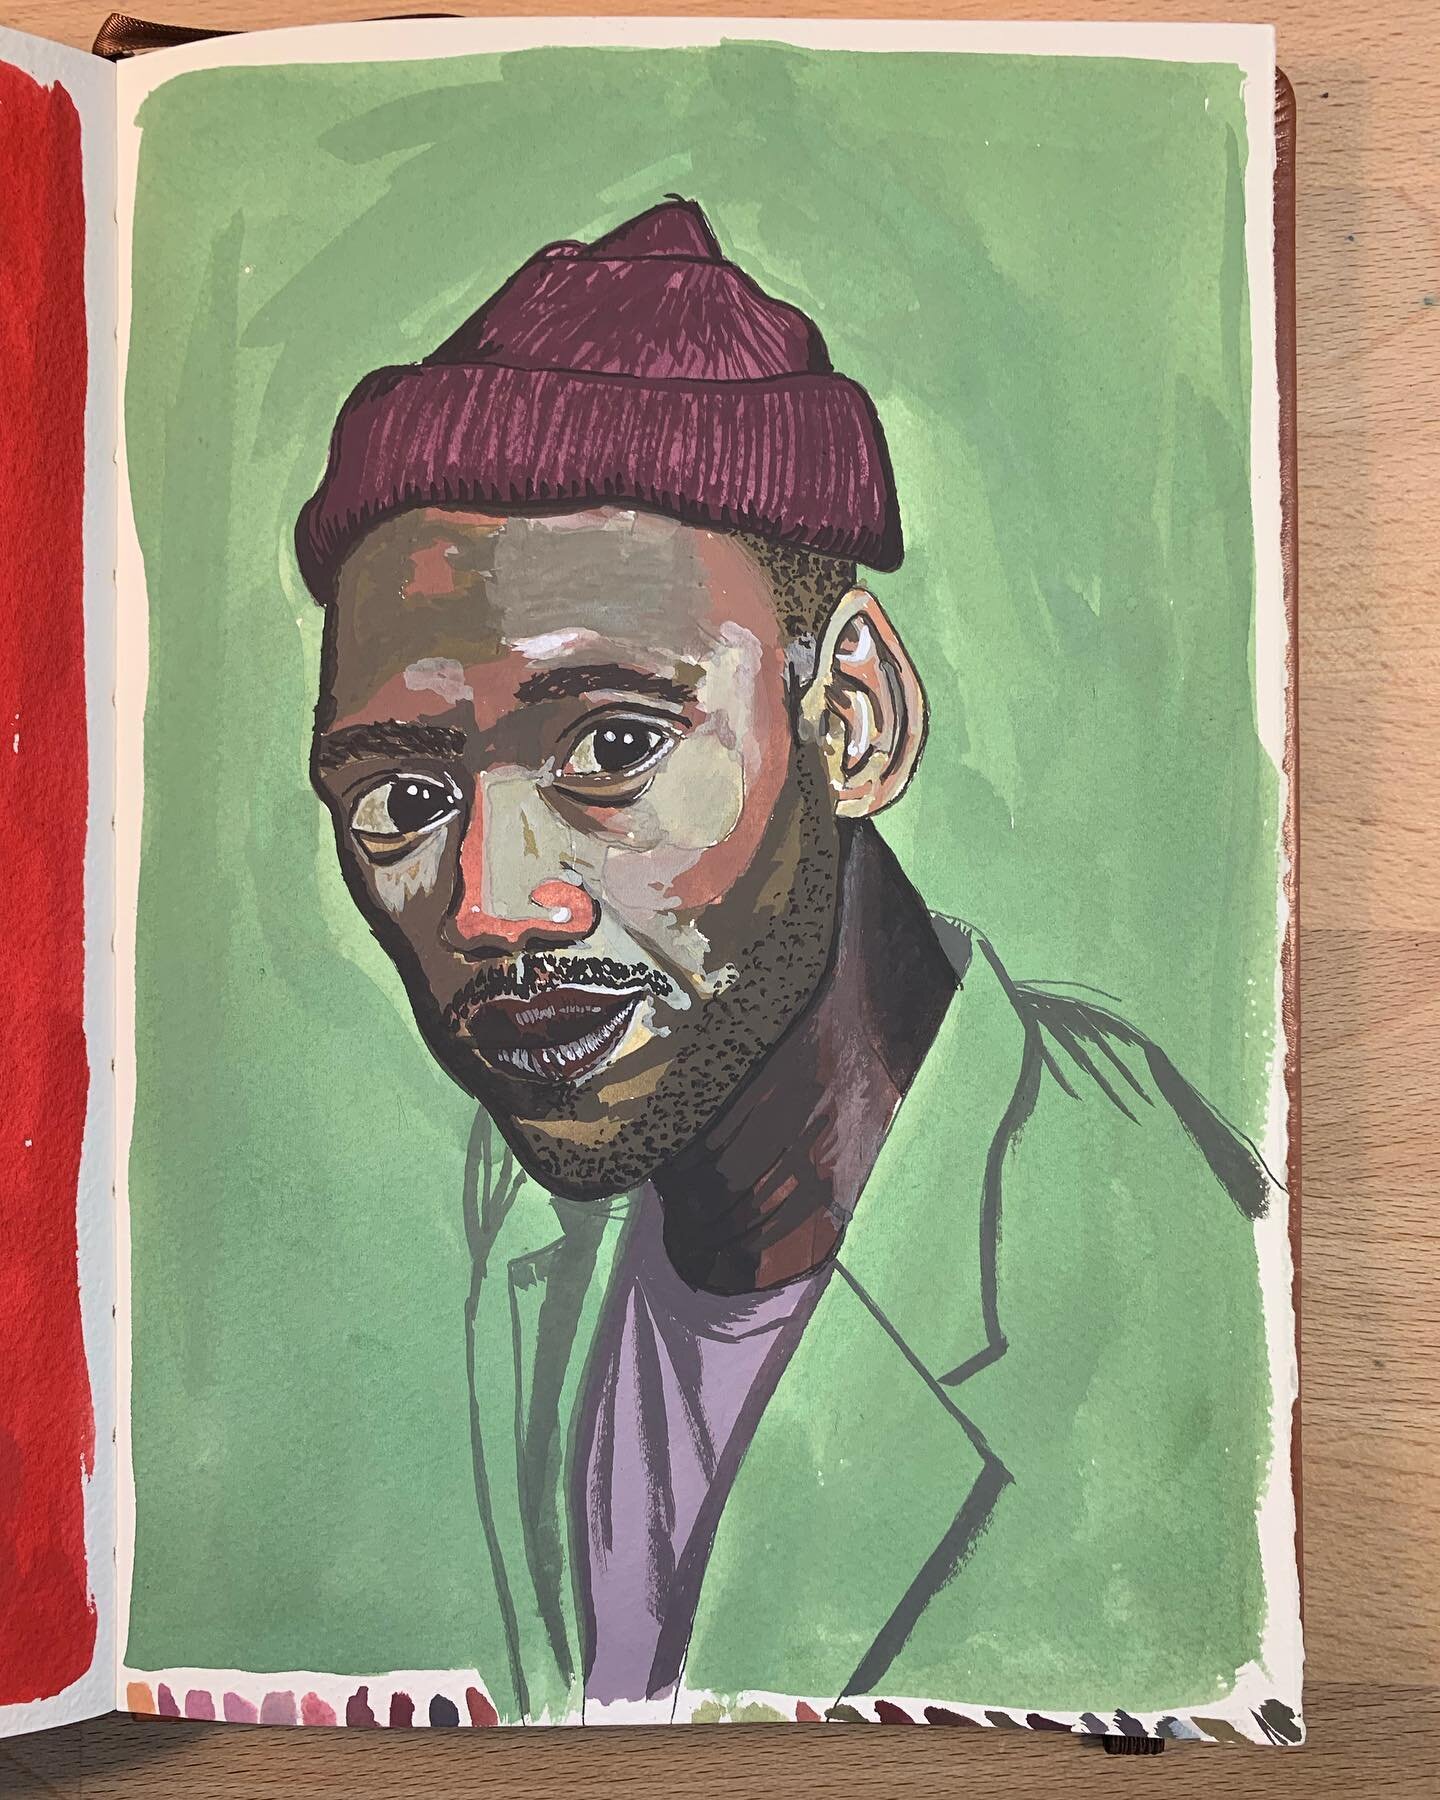 Some colorful portrait practice from this past week featuring an assortment of celebrities including Mahershala Ali, David Lynch and young Ralph Fiennes. I&rsquo;m a little sad that today is the last day of @g_caruso_art Gouache Class. I will miss ha